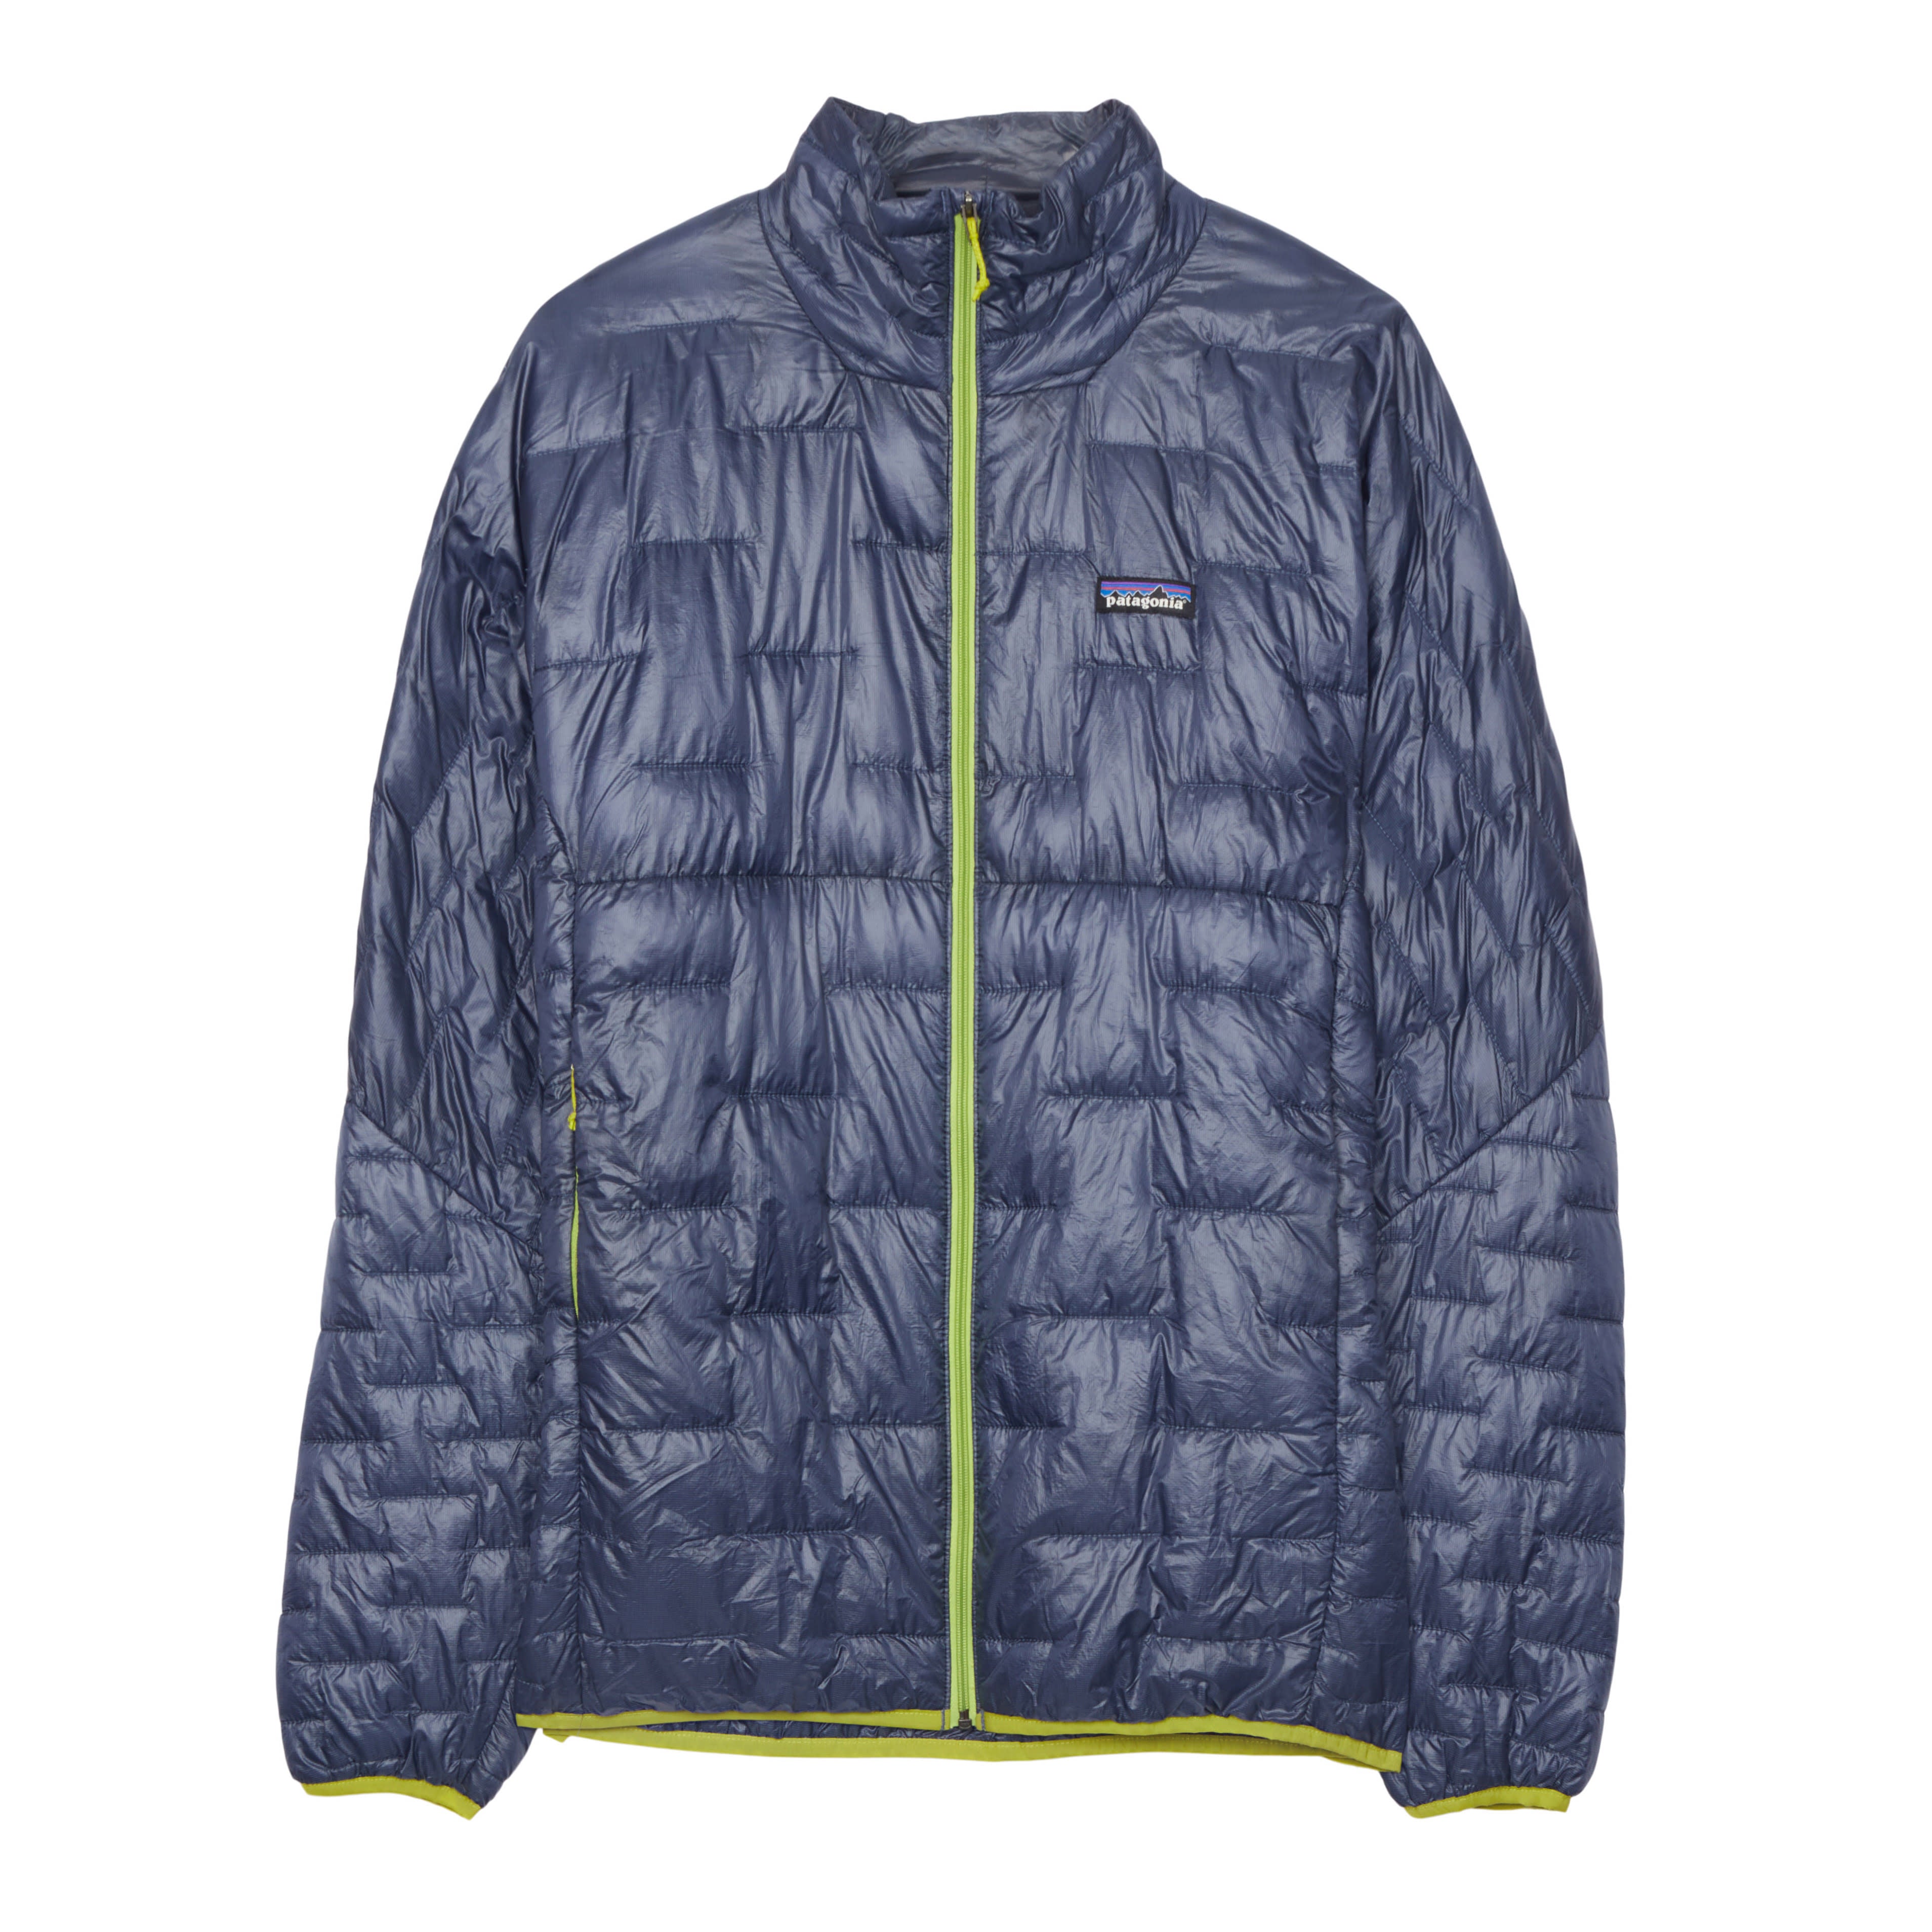 Patagonia M's Micro Puff Jacket Obsidian Plum - Behind the Pines